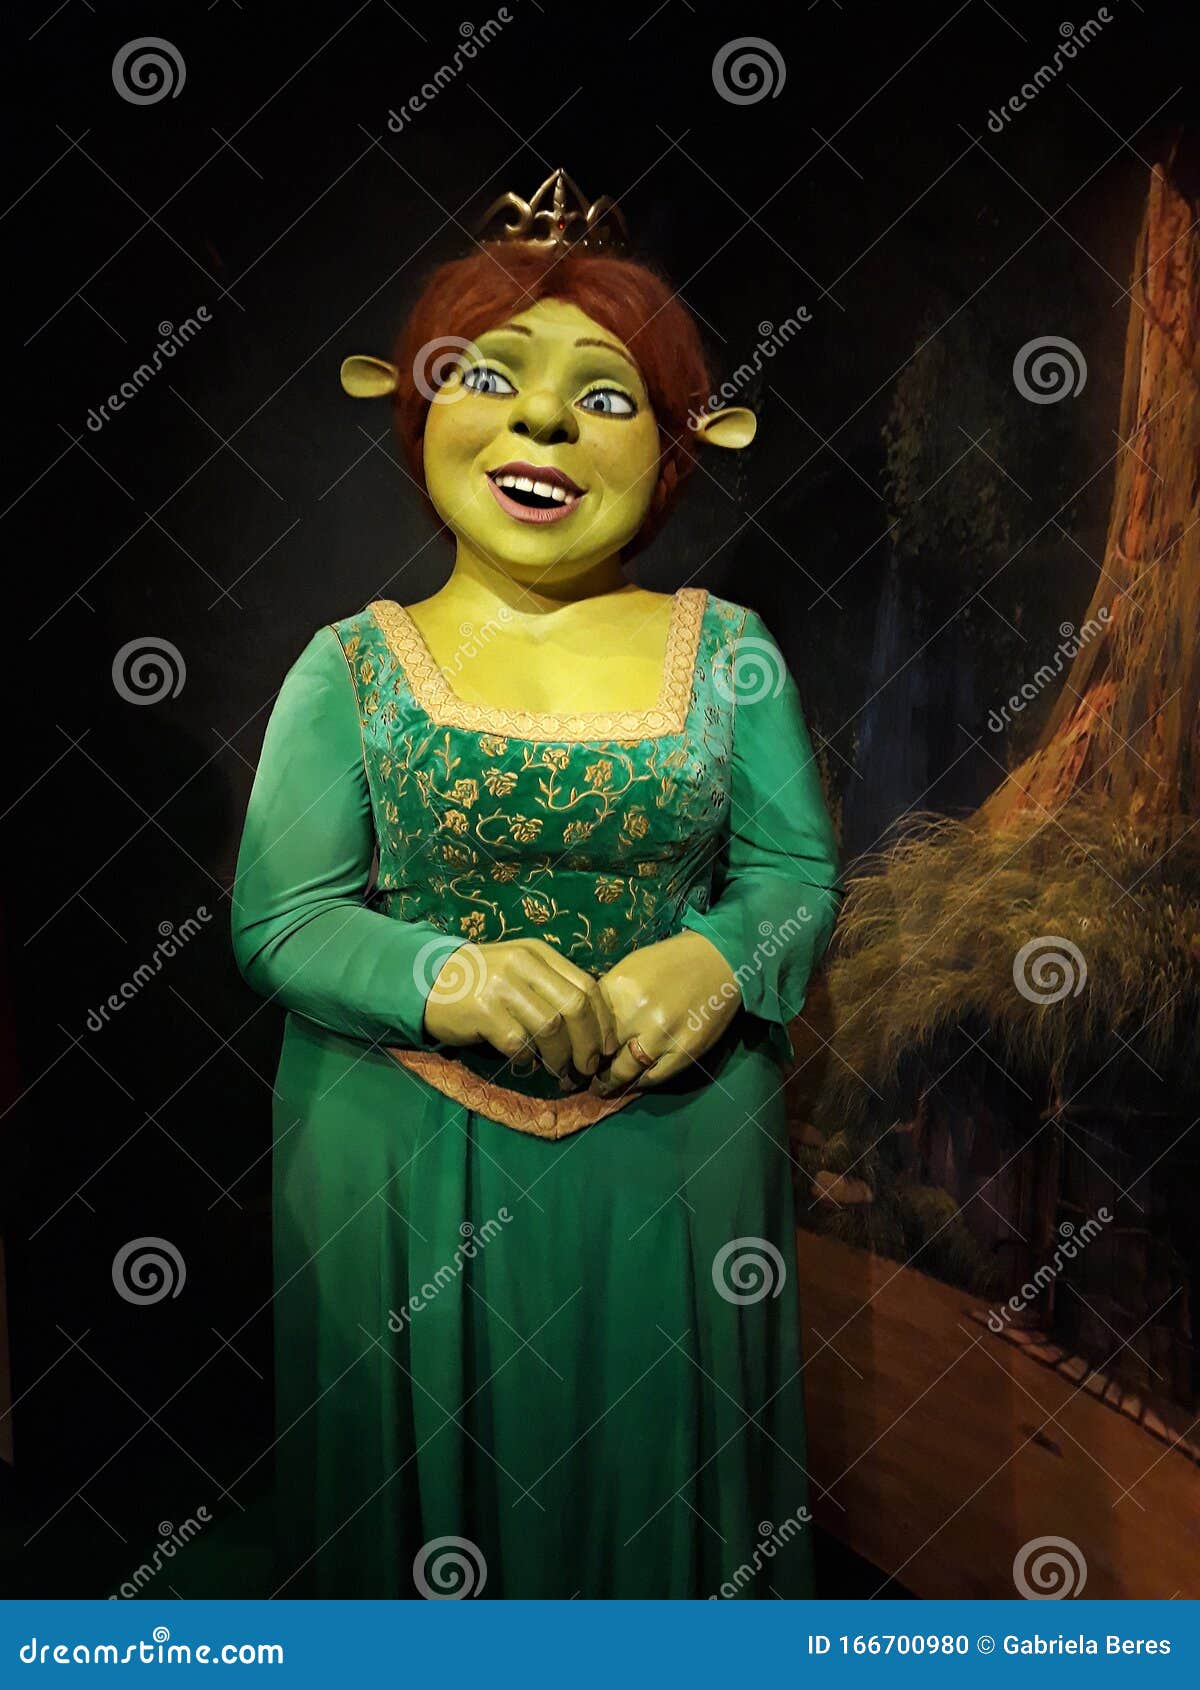 Best of Pictures of fiona from shrek